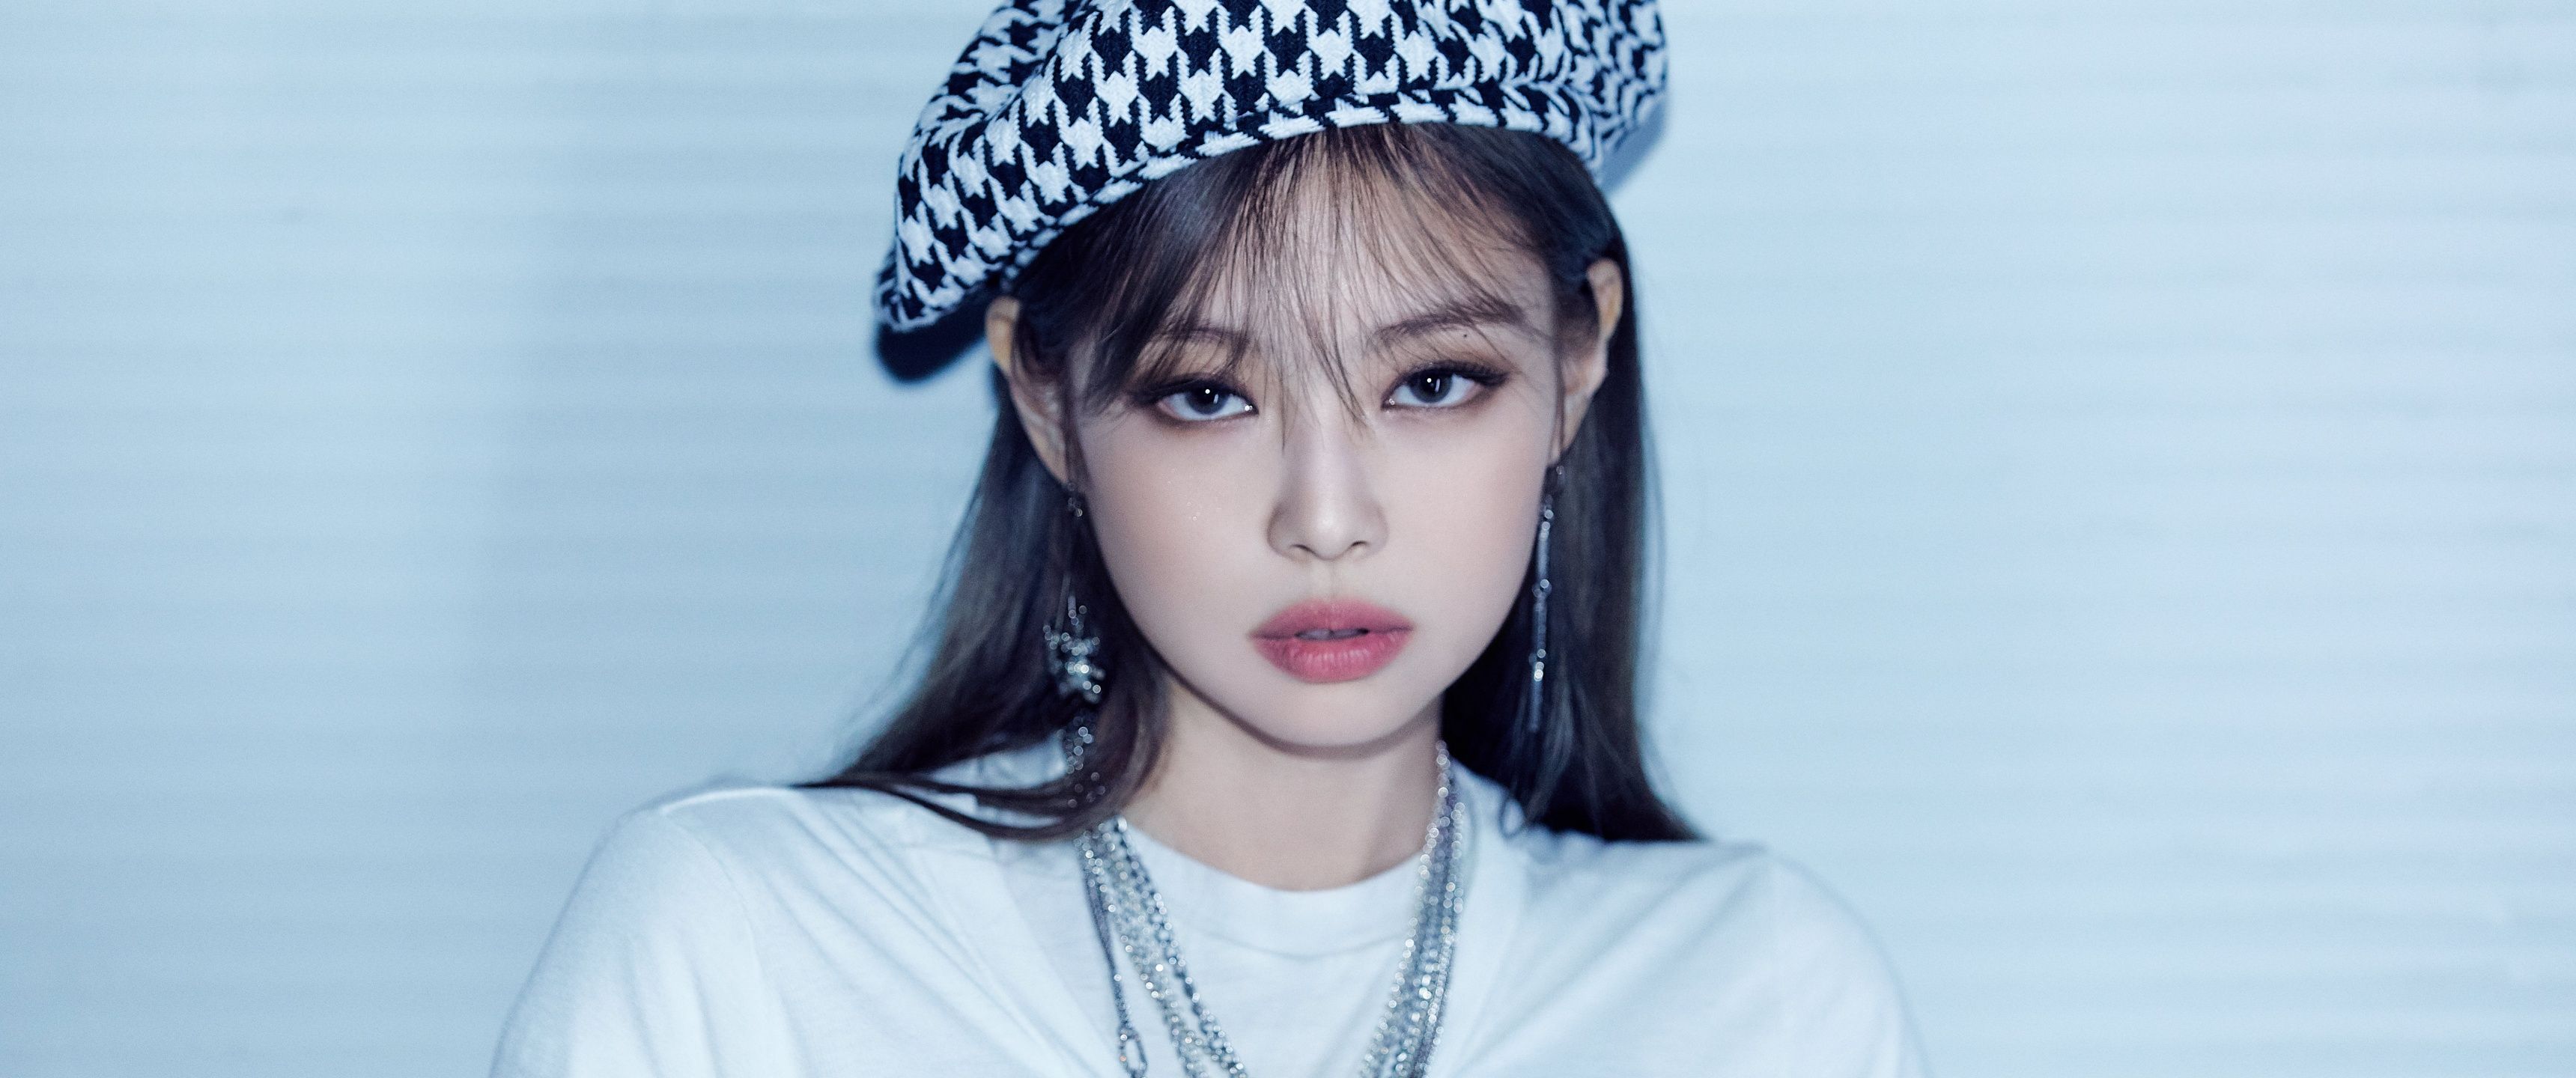 Lisa of Blackpink in a white top and a houndstooth cap - Jennie